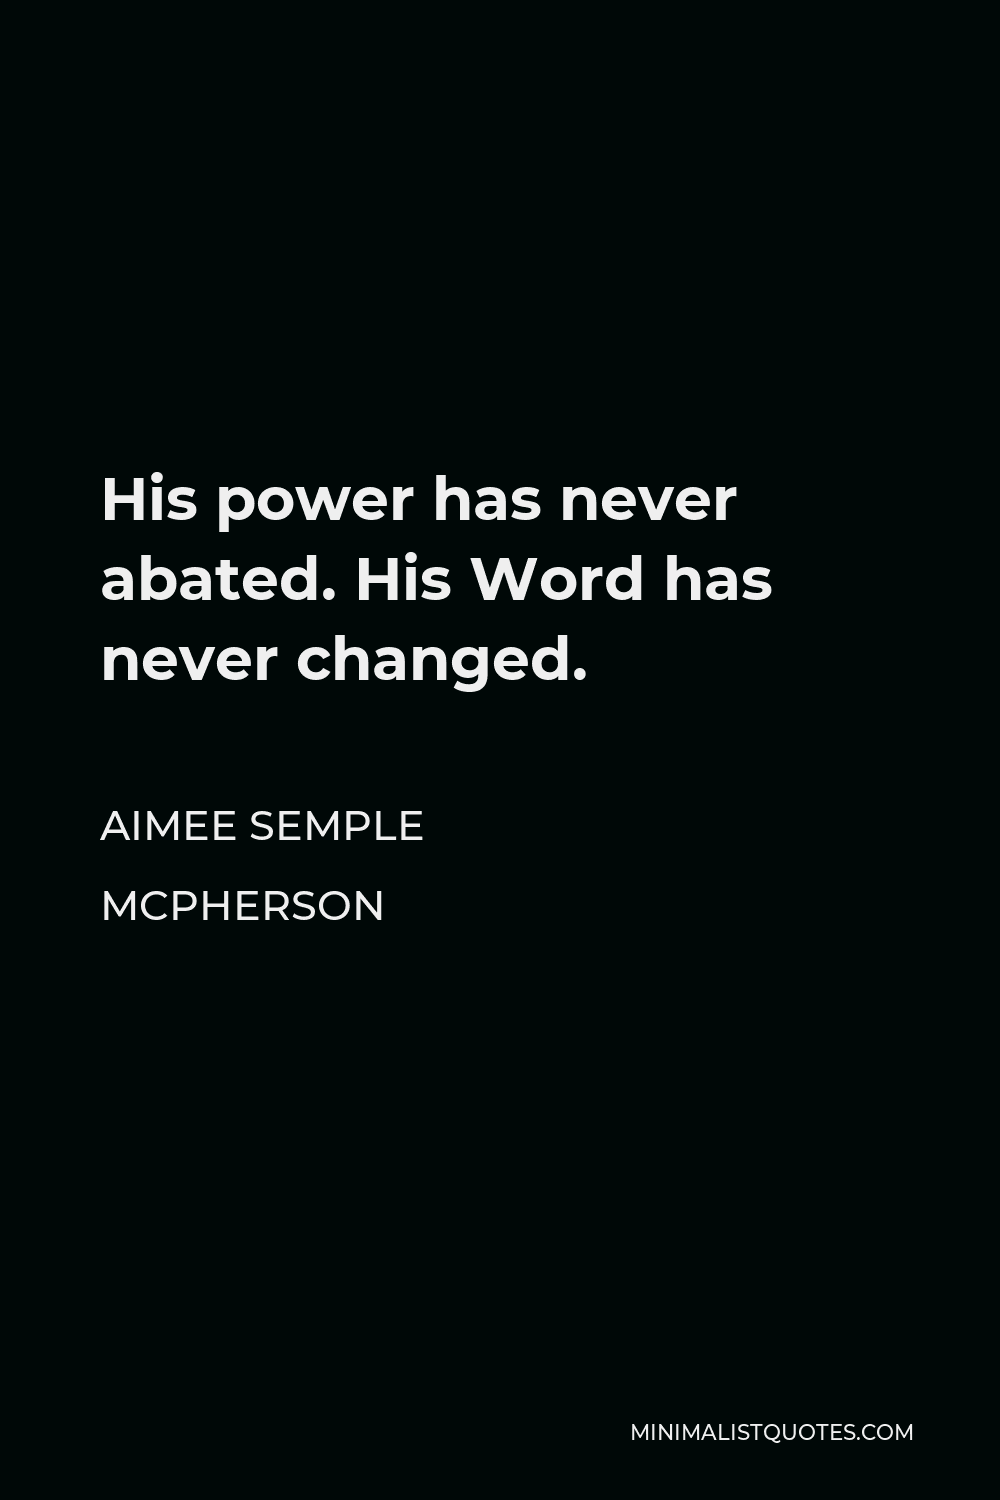 Aimee Semple McPherson Quote - His power has never abated. His Word has never changed.